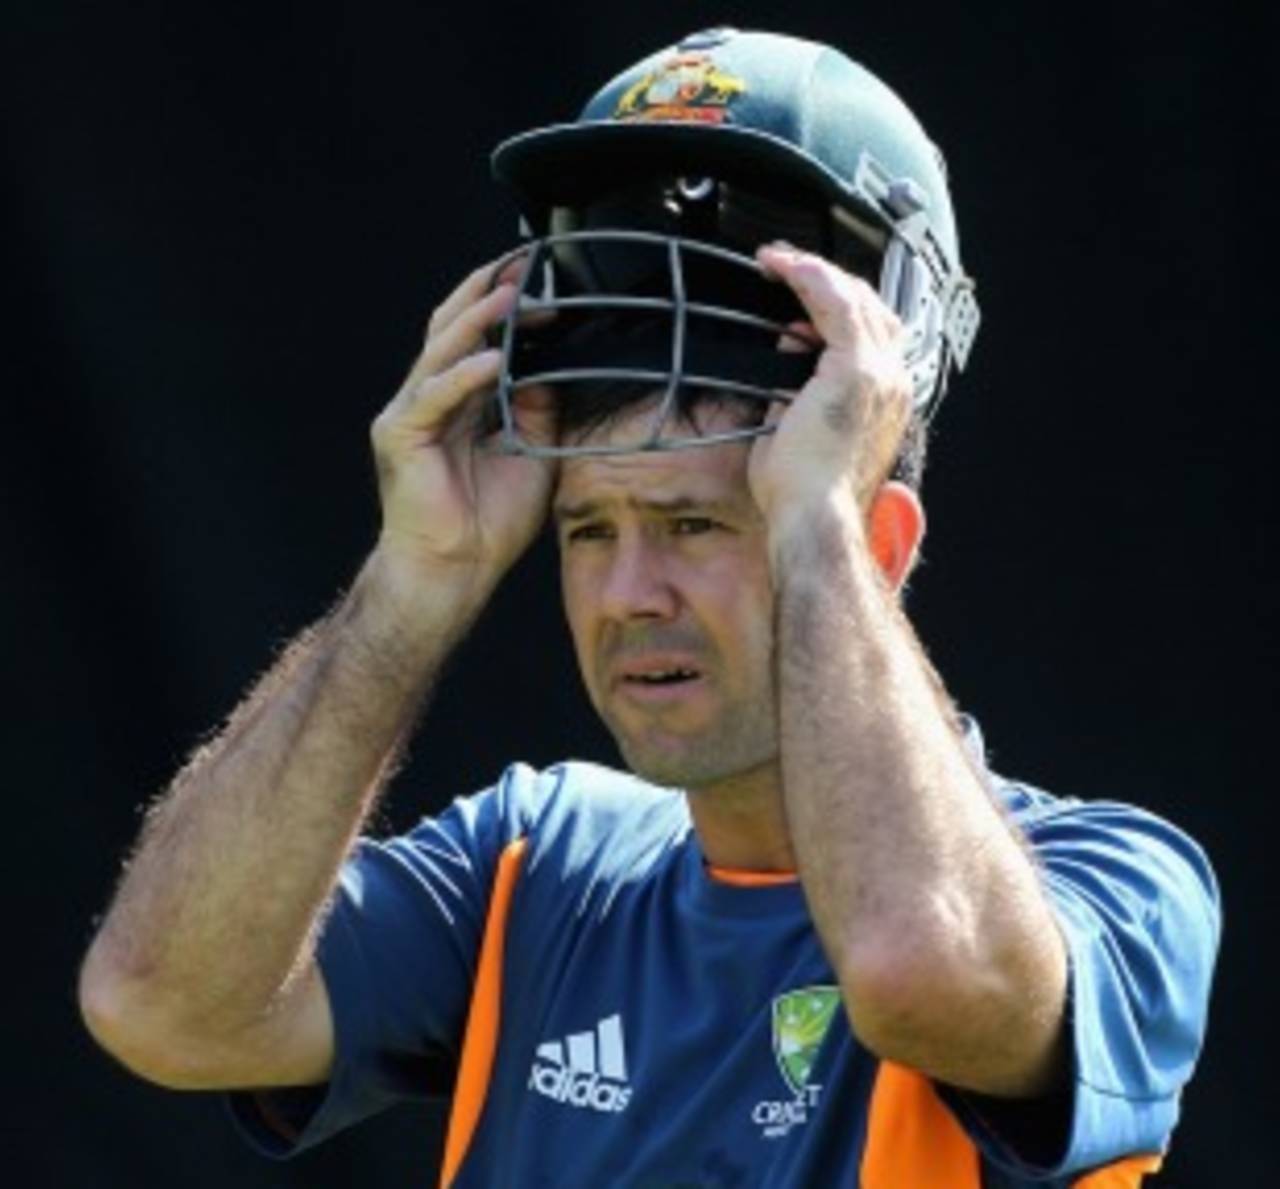 Ricky Ponting has accepted that he did "overstep" the line with his reaction in the dressing room&nbsp;&nbsp;&bull;&nbsp;&nbsp;Getty Images